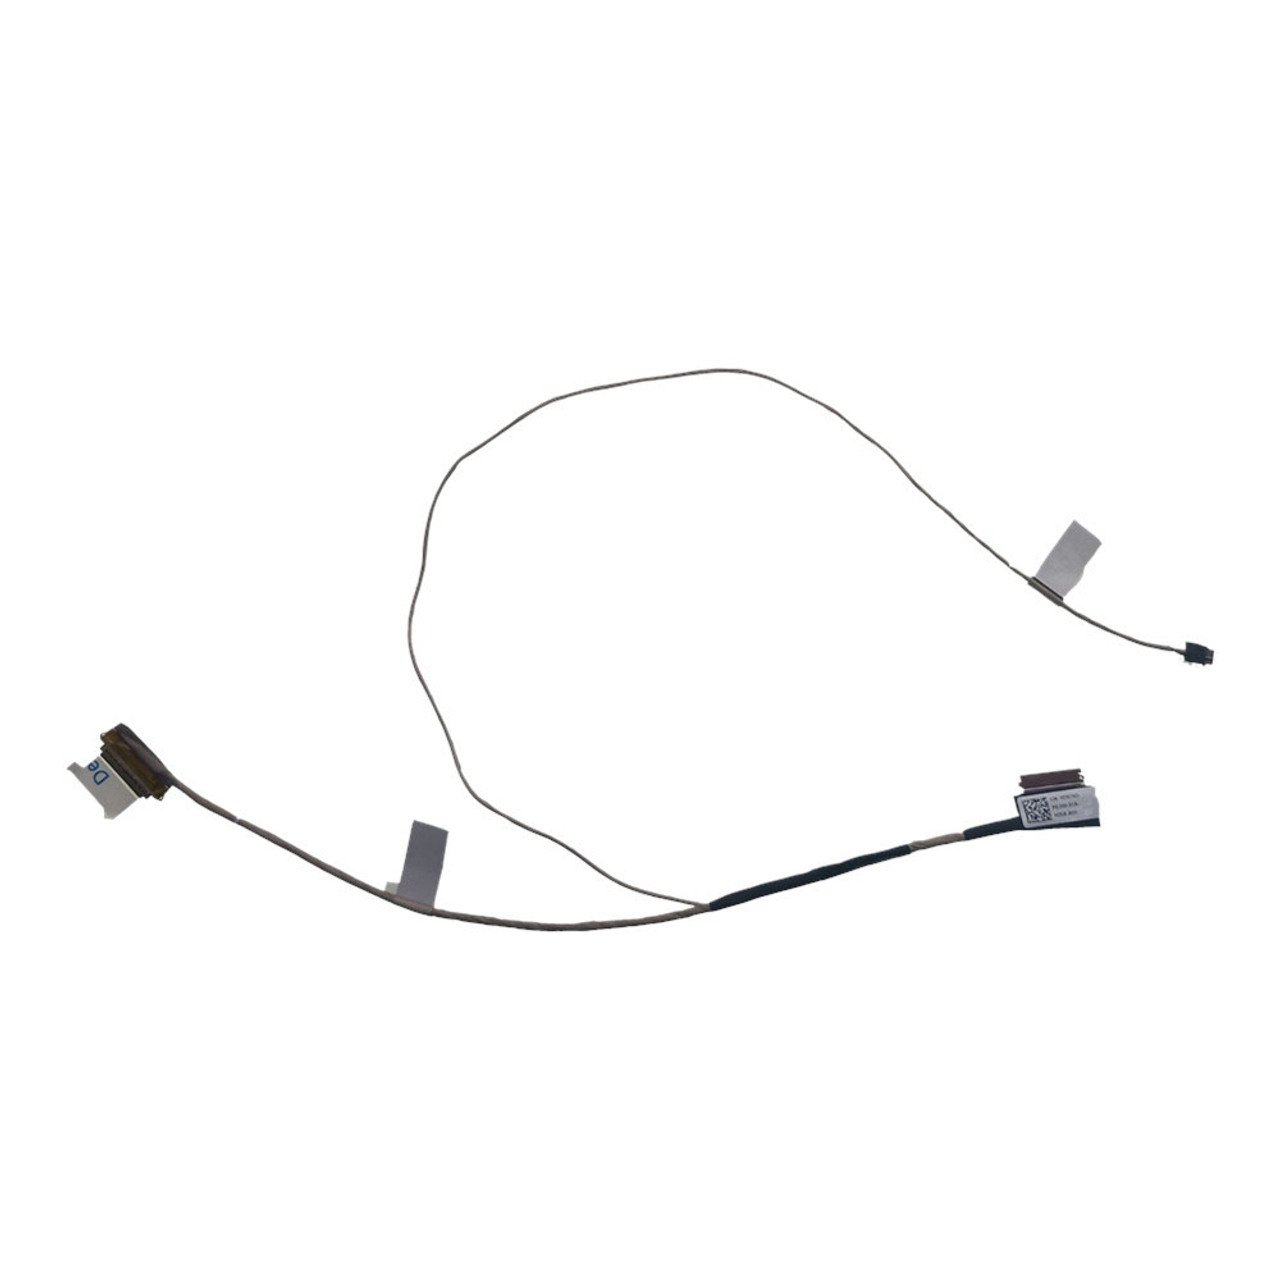 Cable Length: Other Computer Cables Notebook LED LCD LVDS Cable for Dell Vostro V130 V130 13.3 50.4M104.001 06H9HY Display Video Screen Flex